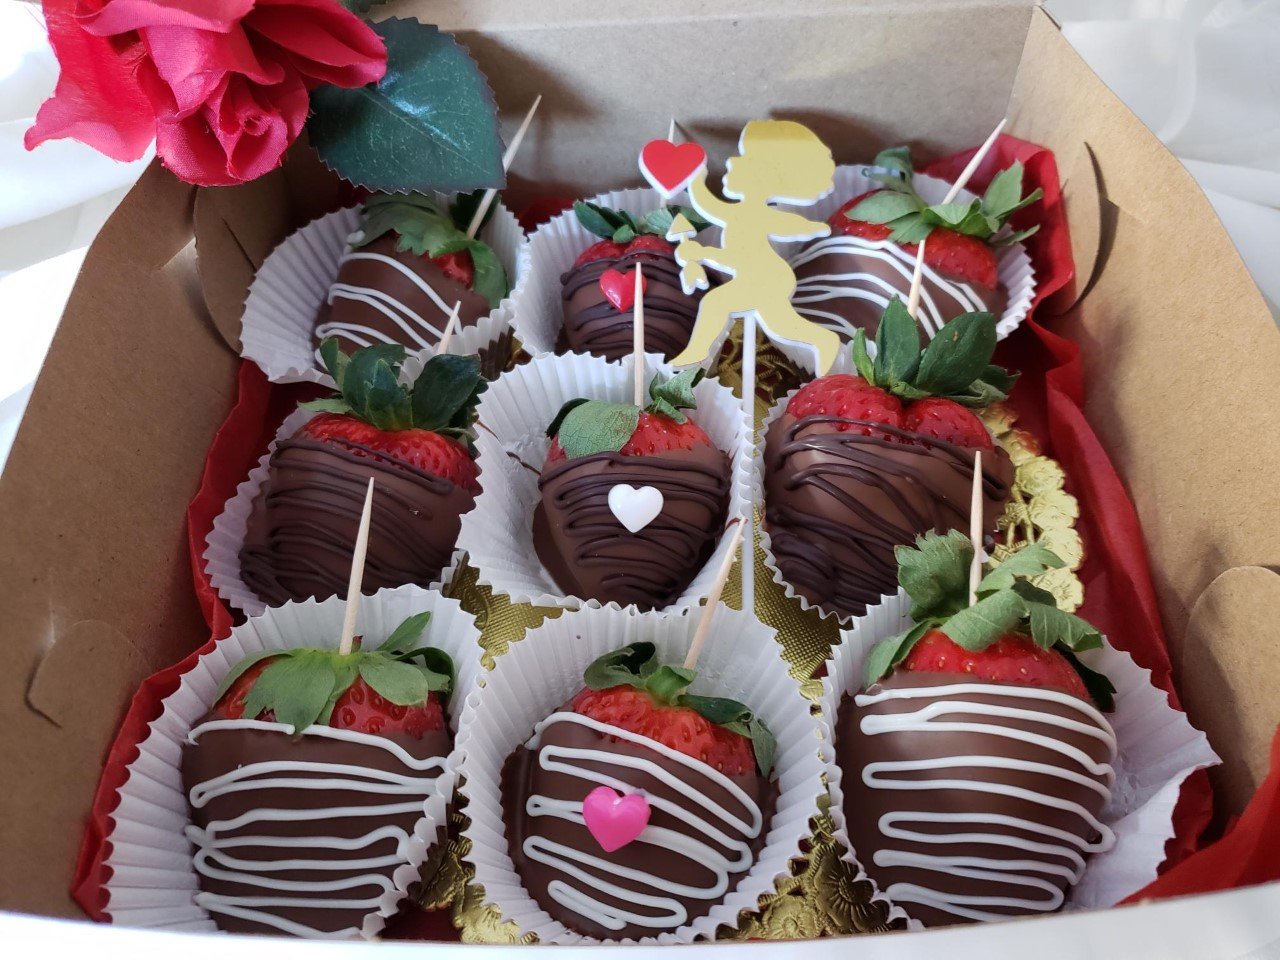 Alpine Chocolat Haus Plymouth - Stop in for chocolate covered strawberries!!  This weekend while supplies last!!